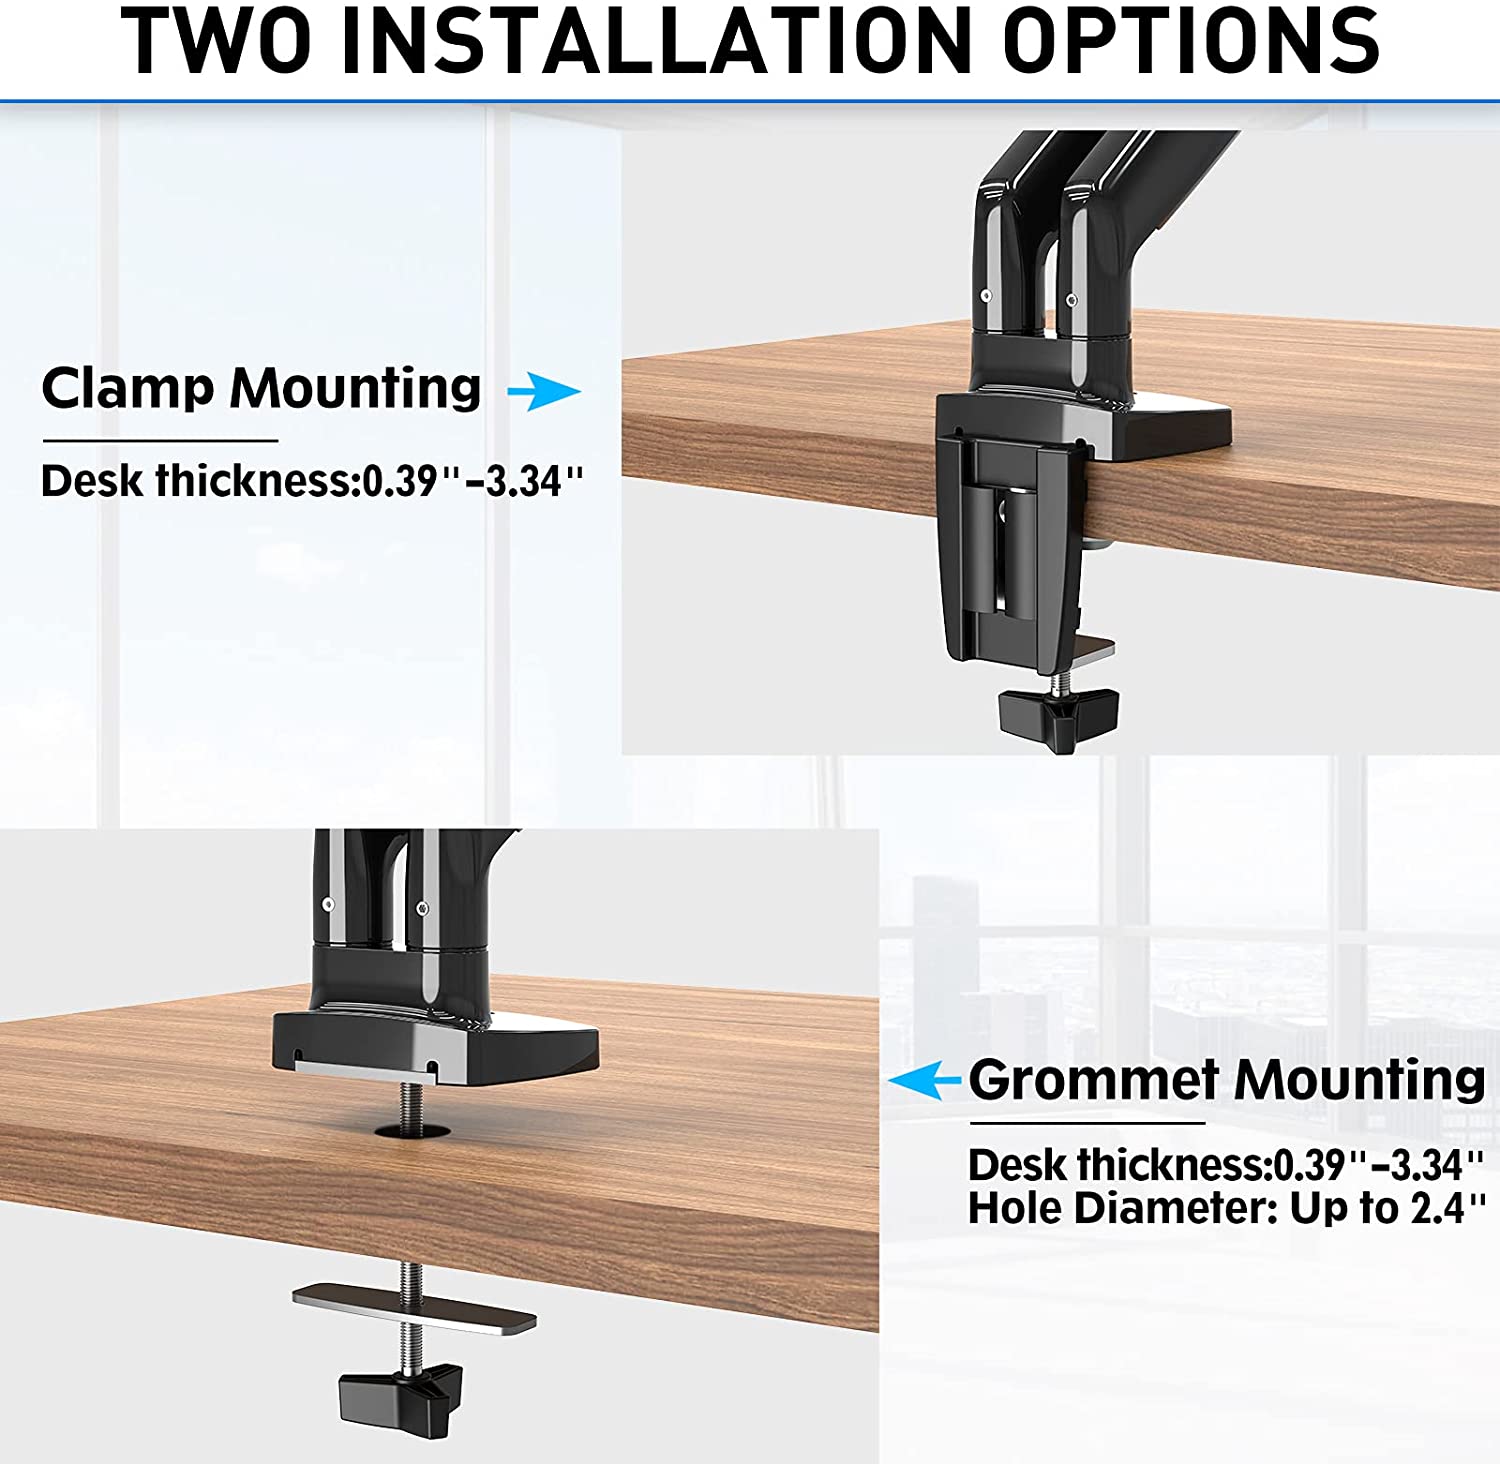 dual monitor mount offers clamp mounting and grommet mounting